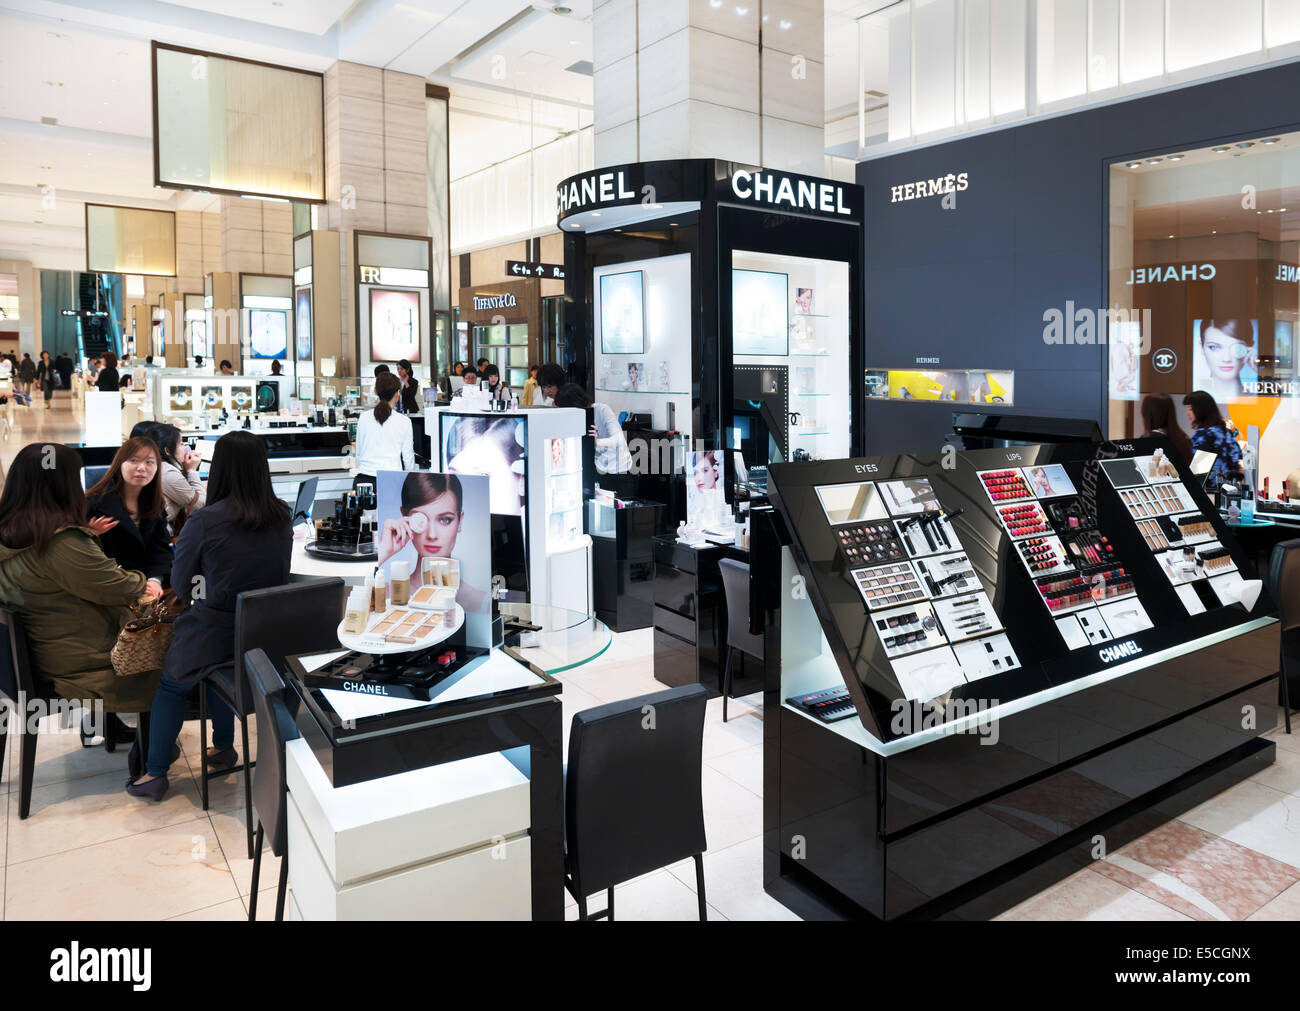 CHANEL Boutique in Thanh pho Ho Chi Minh  Home  Facebook